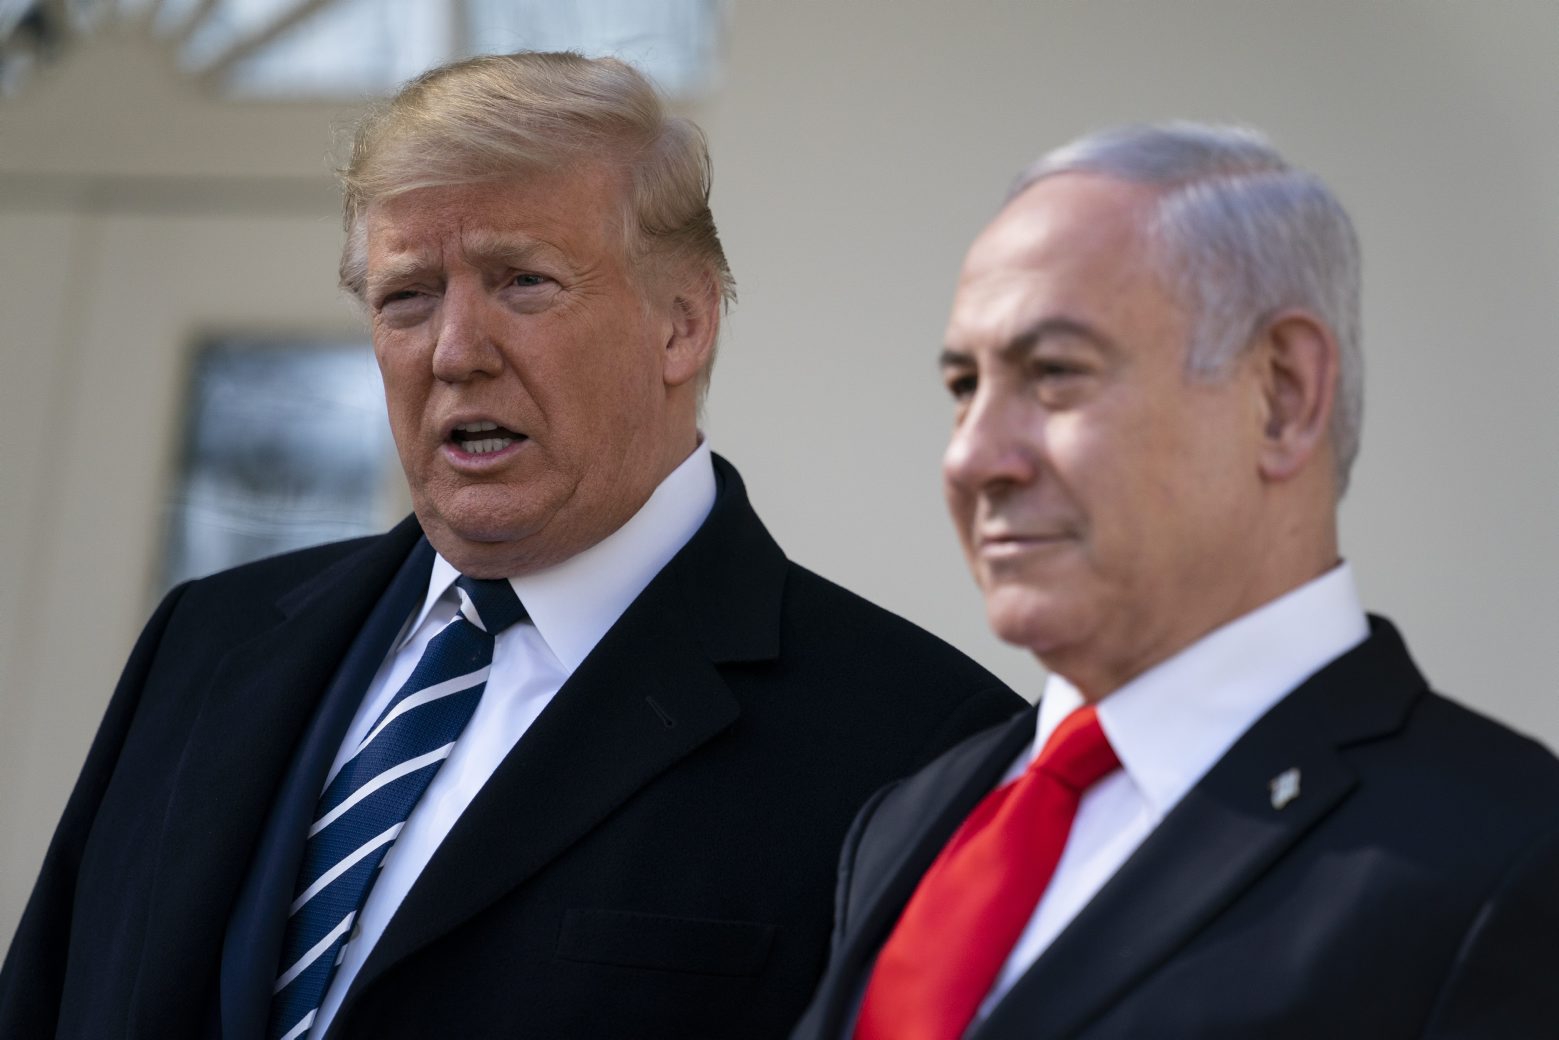 President Donald Trump and Israeli Prime Minister Benjamin Netanyahu talk with reporters before a meeting in the Oval Office of the White House, Monday, Jan. 27, 2020, in Washington. (AP Photo/ Evan Vucci)
Donald Trump,Benjamin Netanyahu Trump